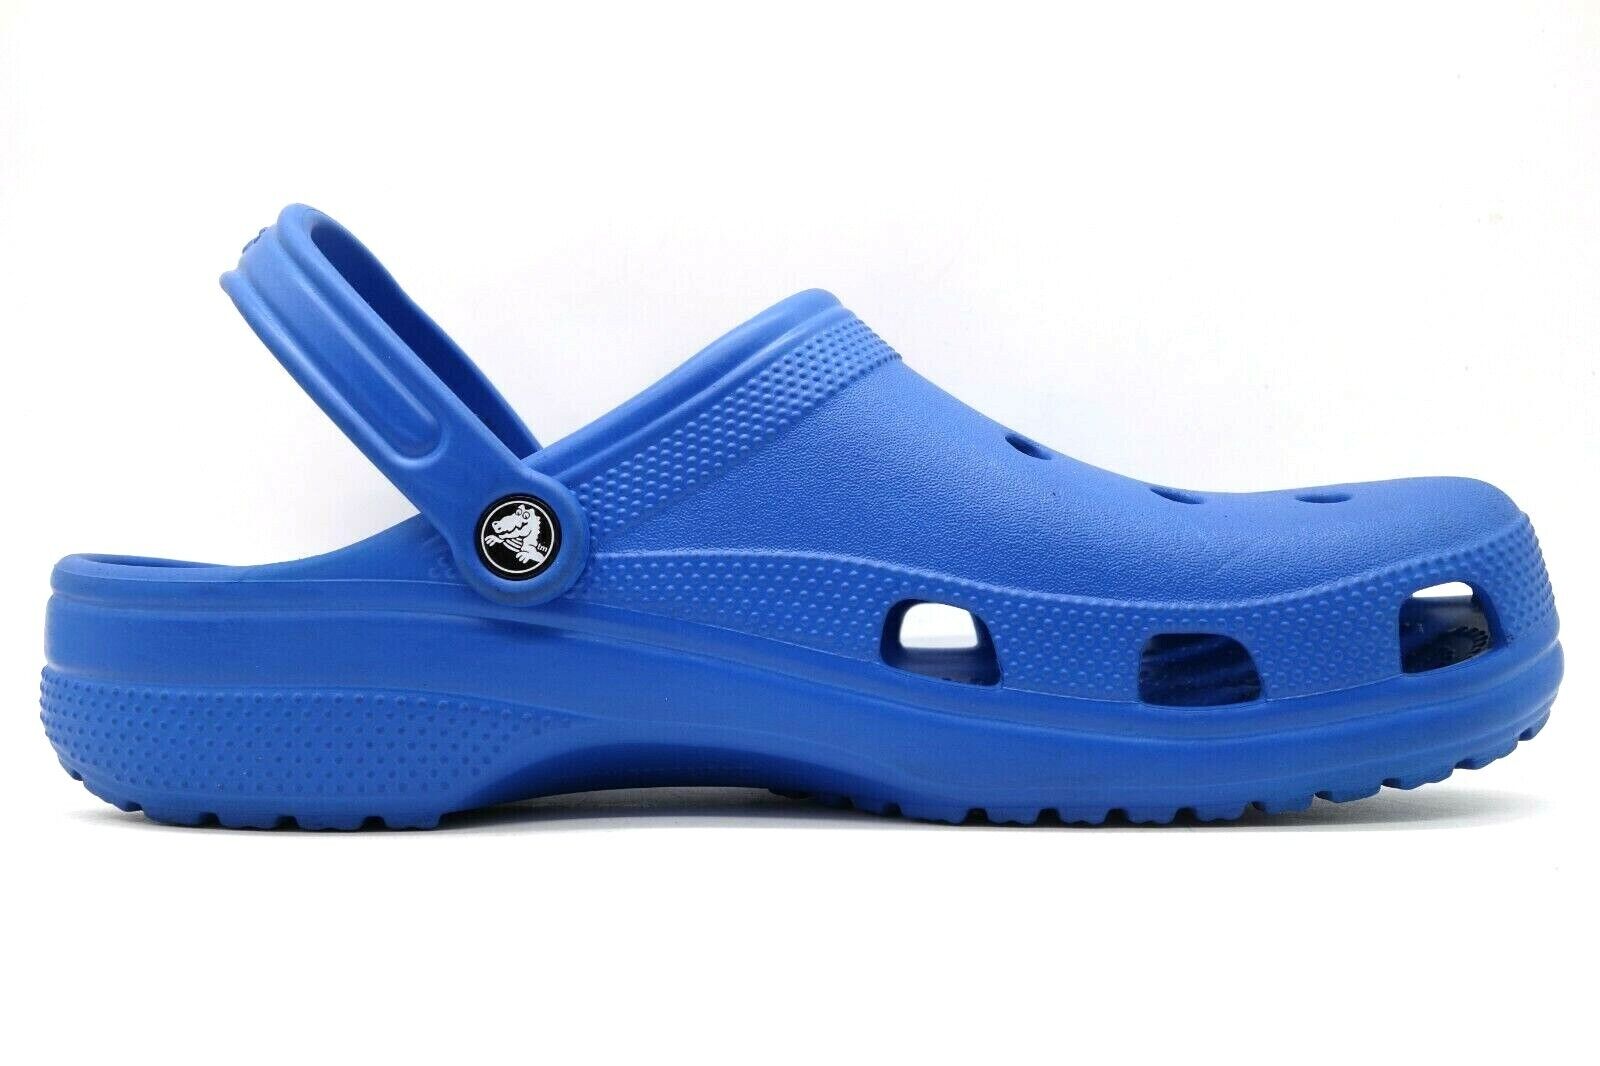 Crocs Logo Blue Casual Slip On Shoes 13 Clogs Elegant New Shipping Free Men#039;s Loafers